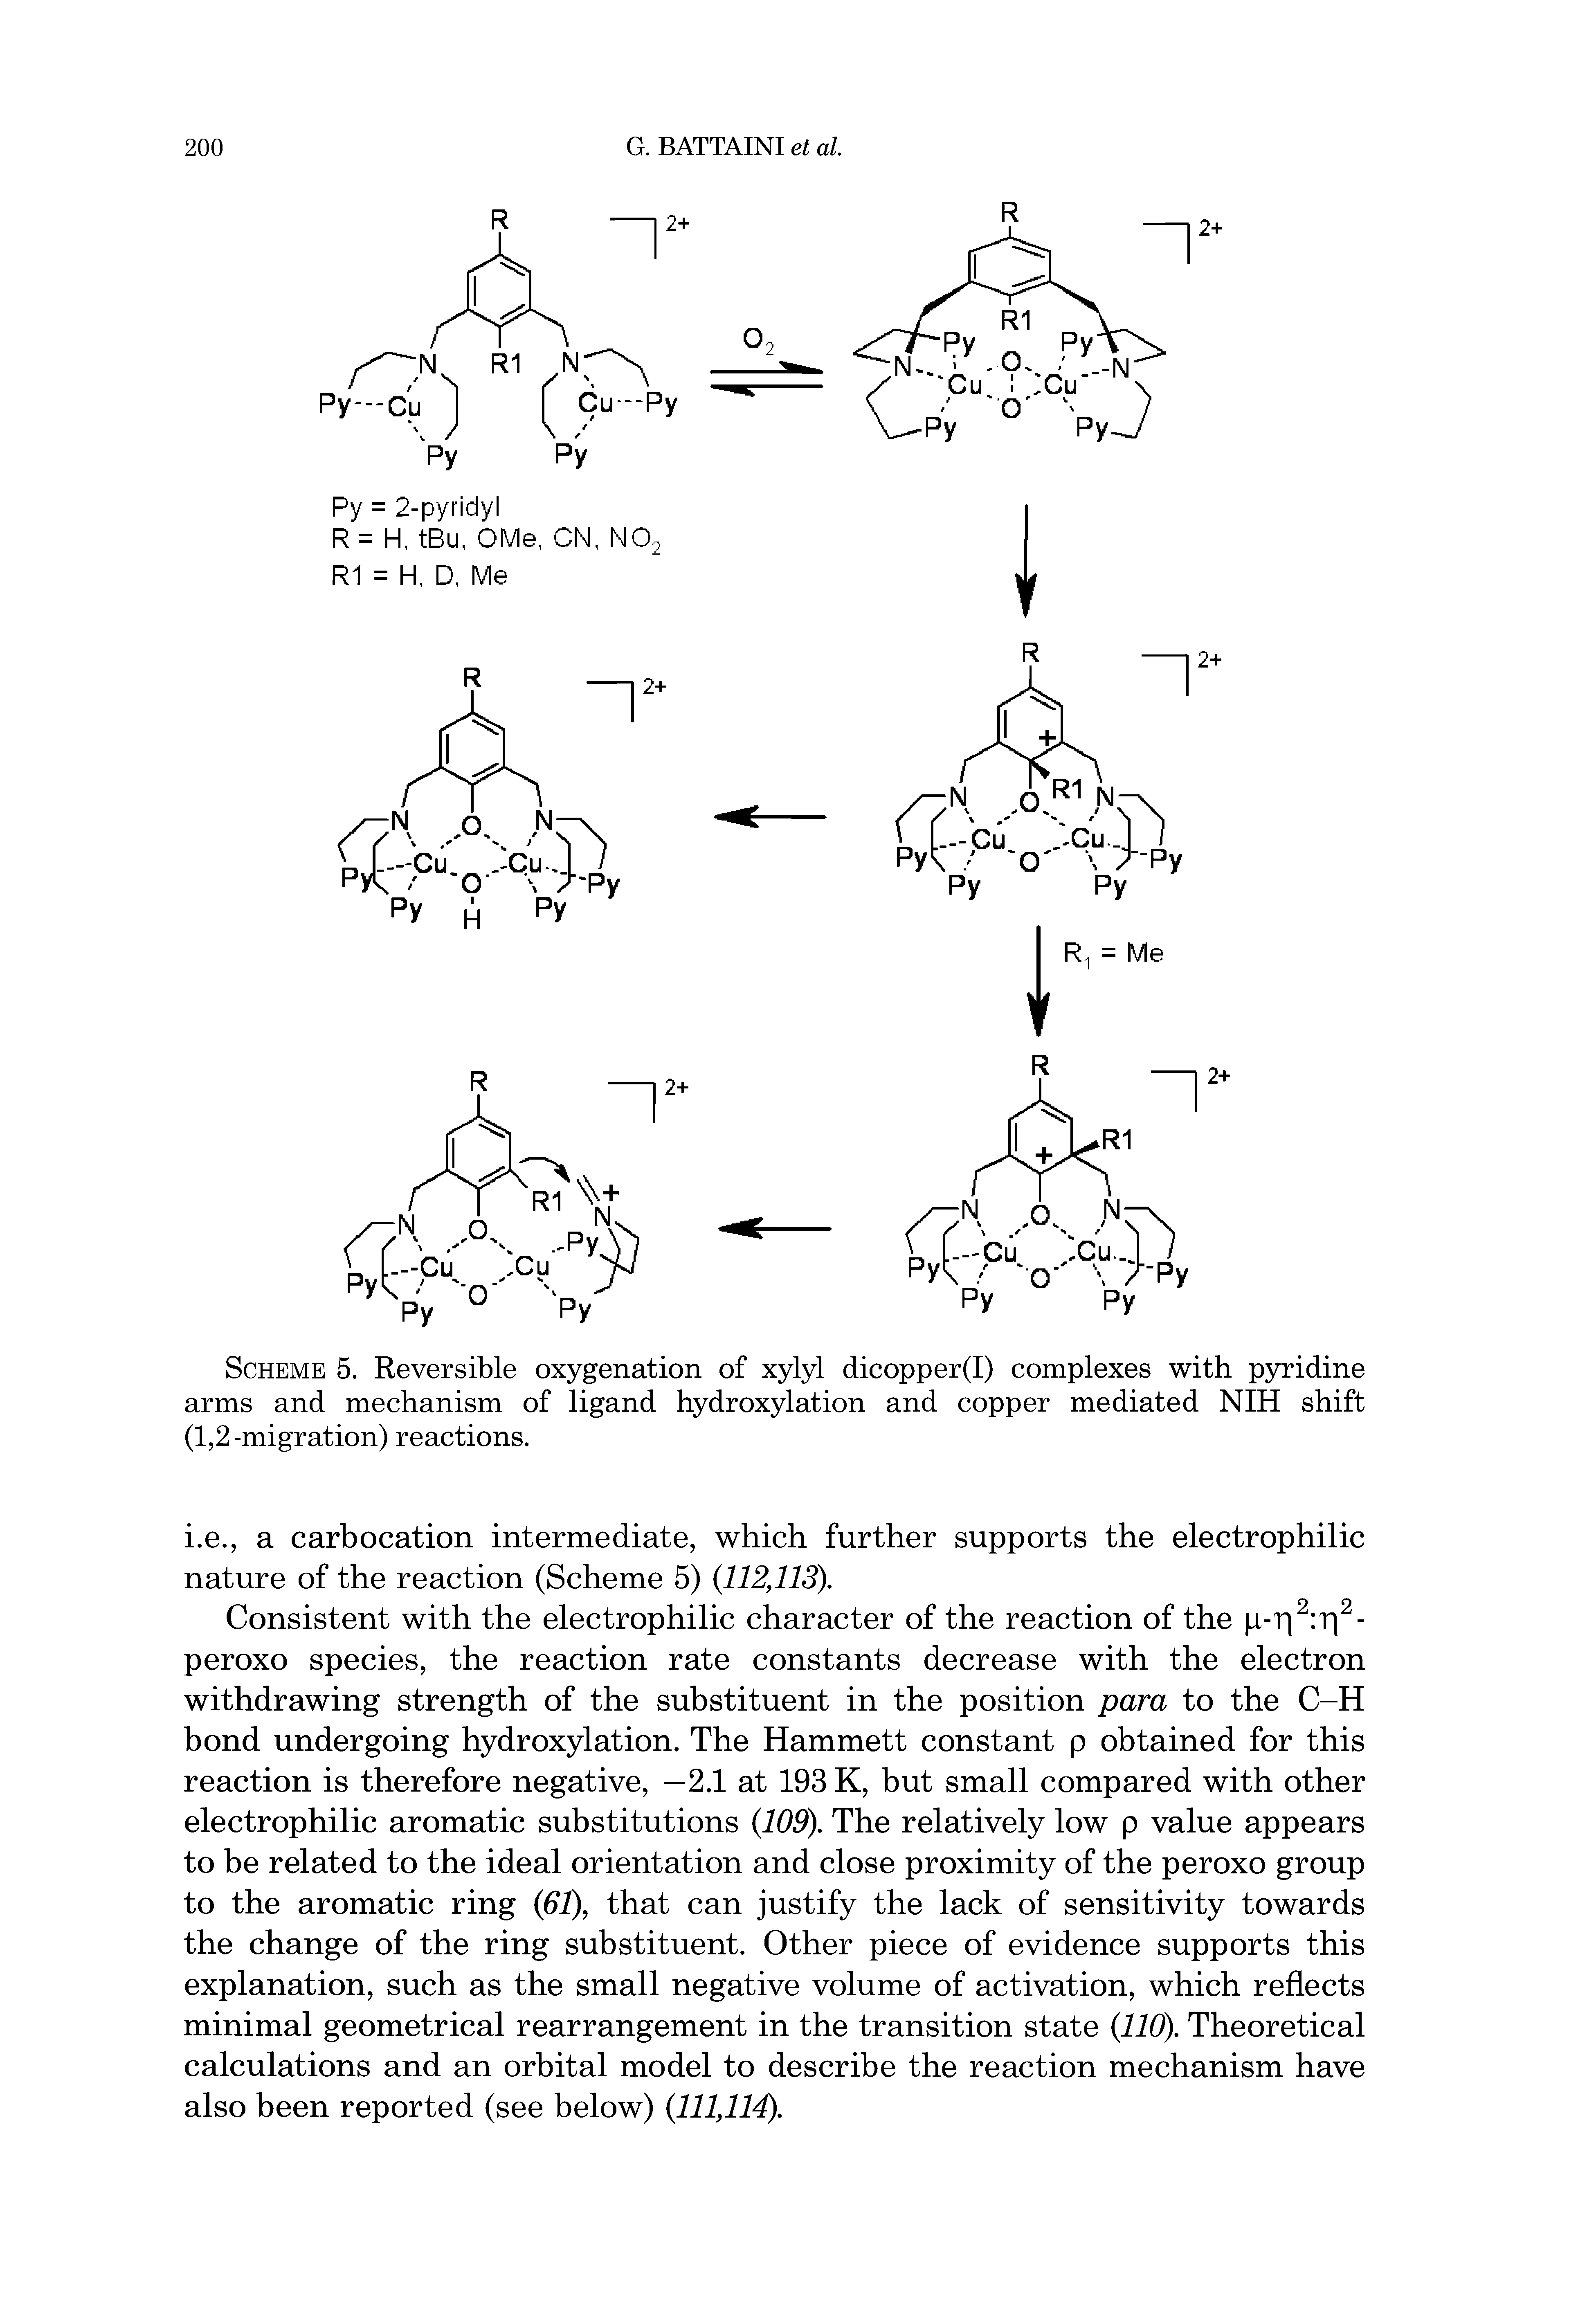 Scheme 5. Reversible oxygenation of xylyl dicopper(I) complexes with pyridine arms and mechanism of ligand hydroxylation and copper mediated NIH shift (1,2-migration) reactions.